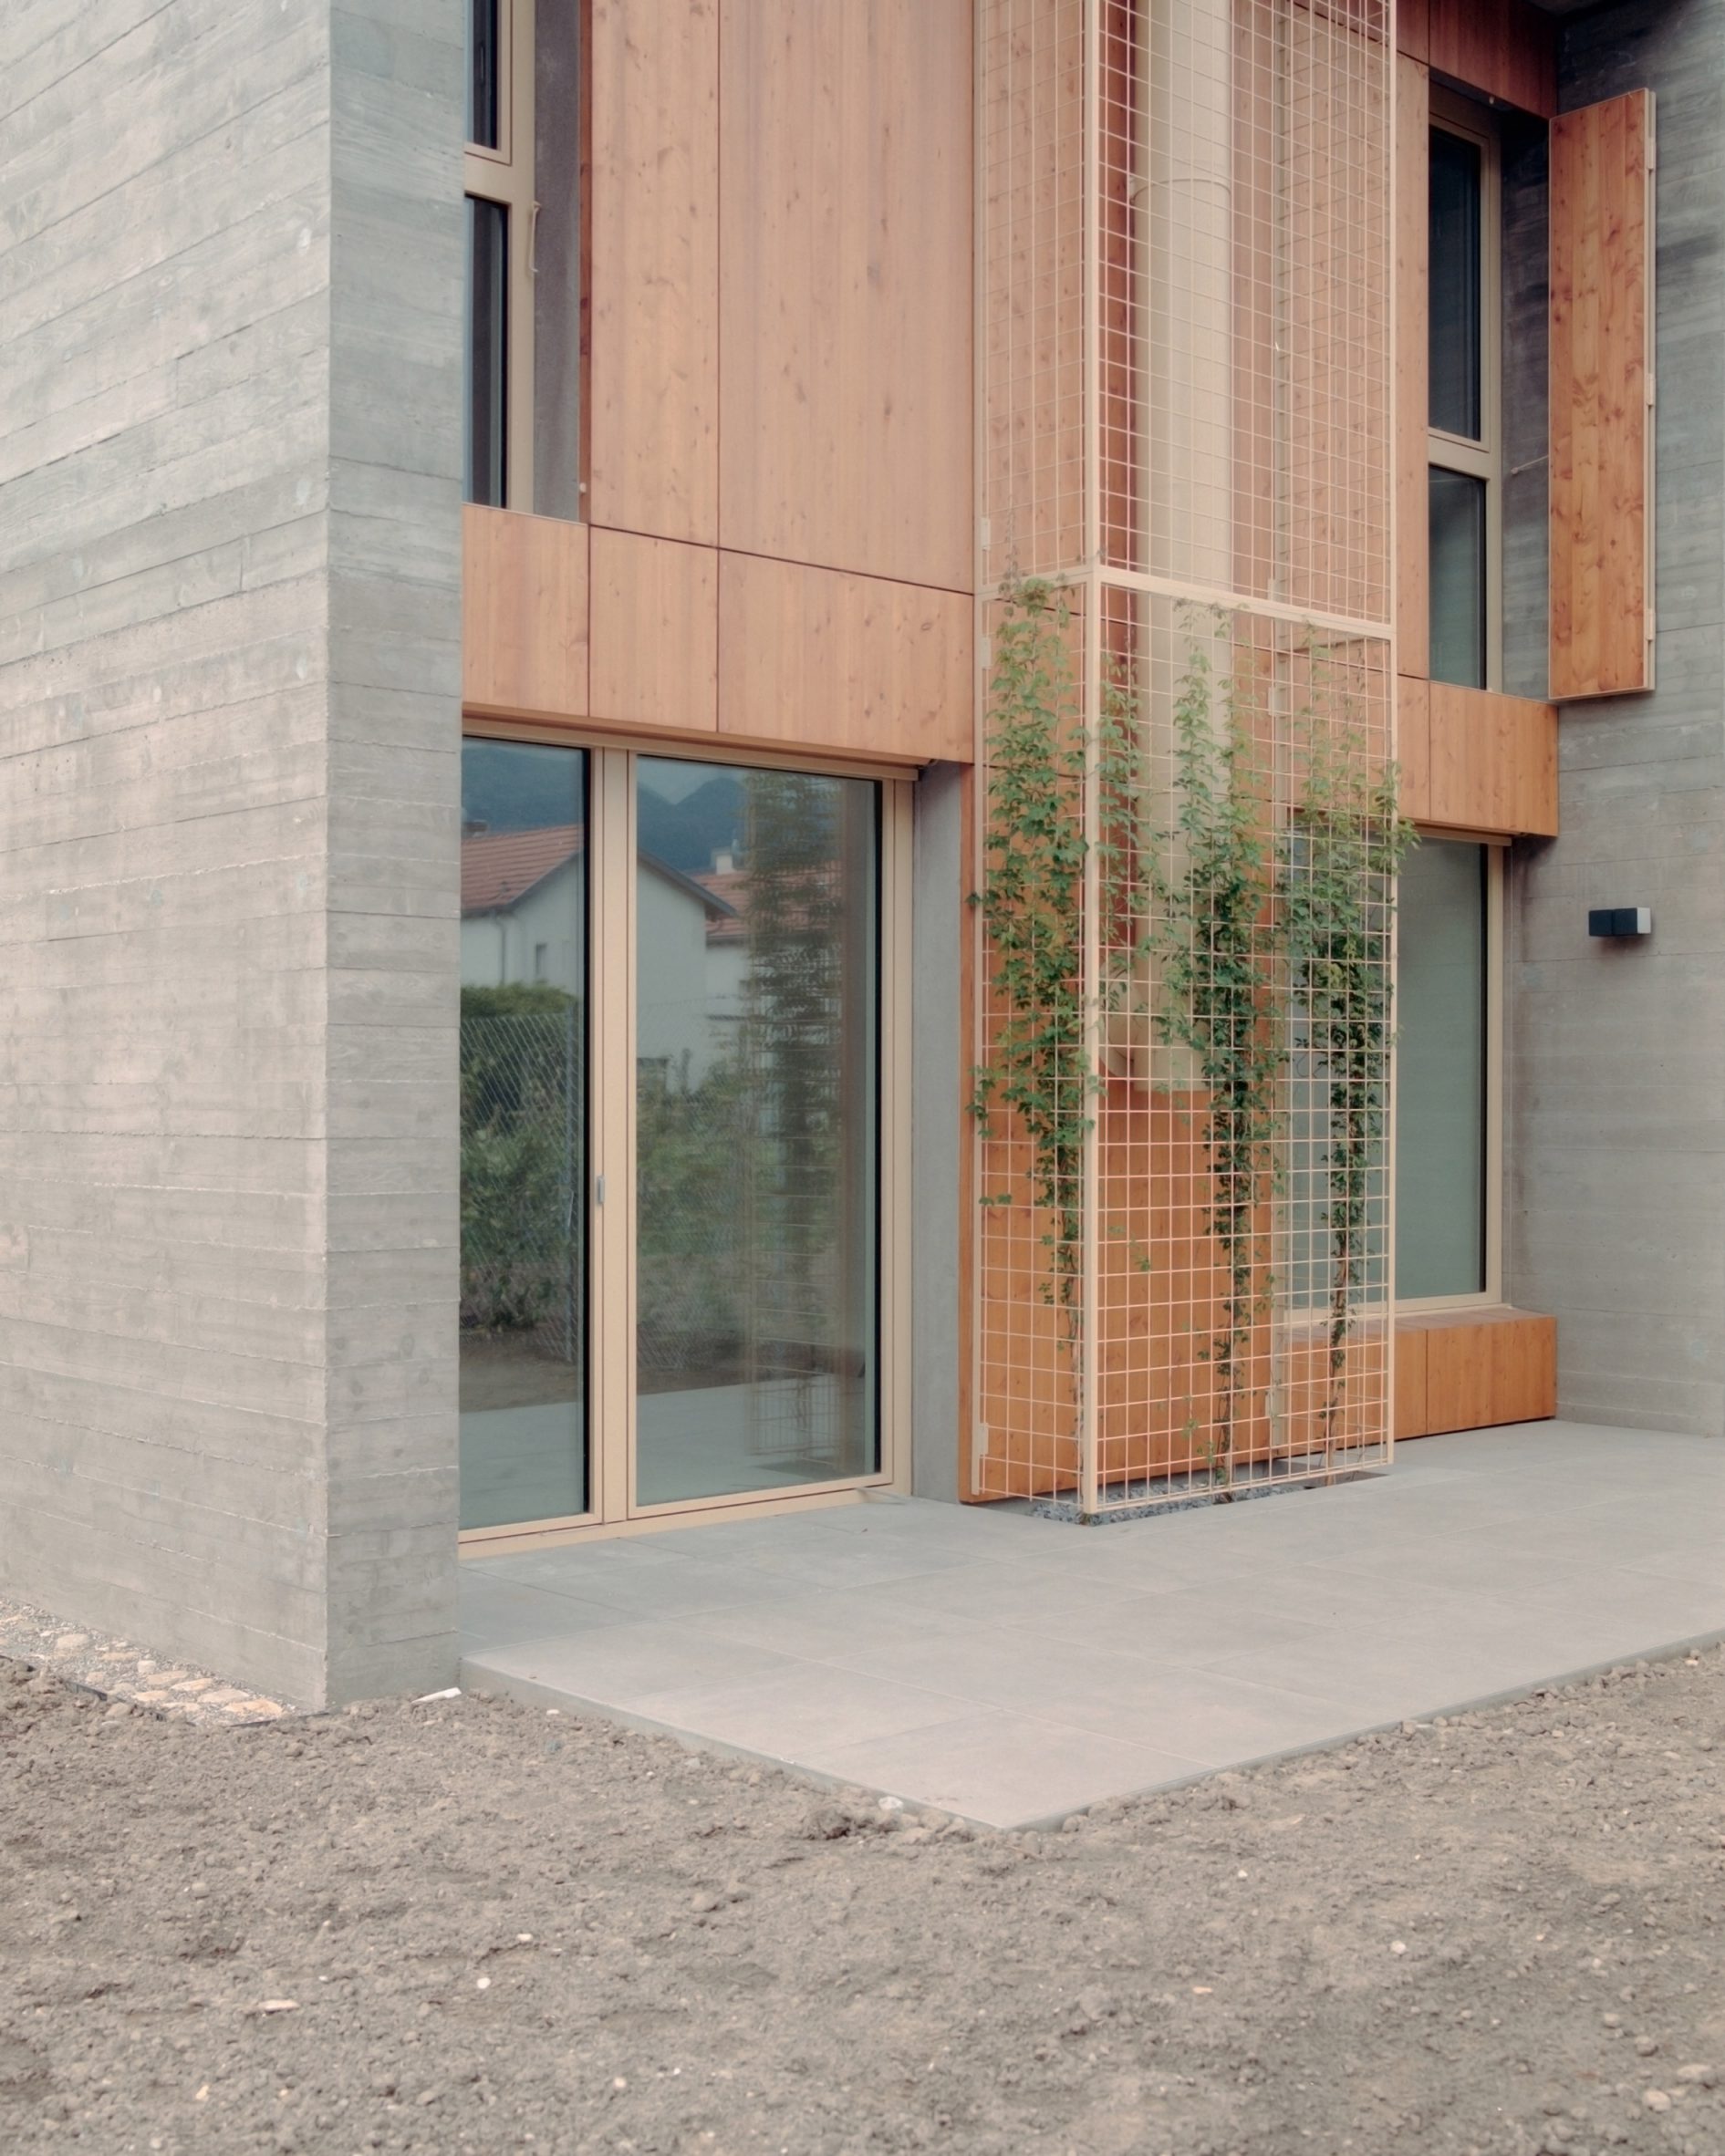 External concrete and timber panelling of terrace houses in Switzerland by Atelier Rampazzi